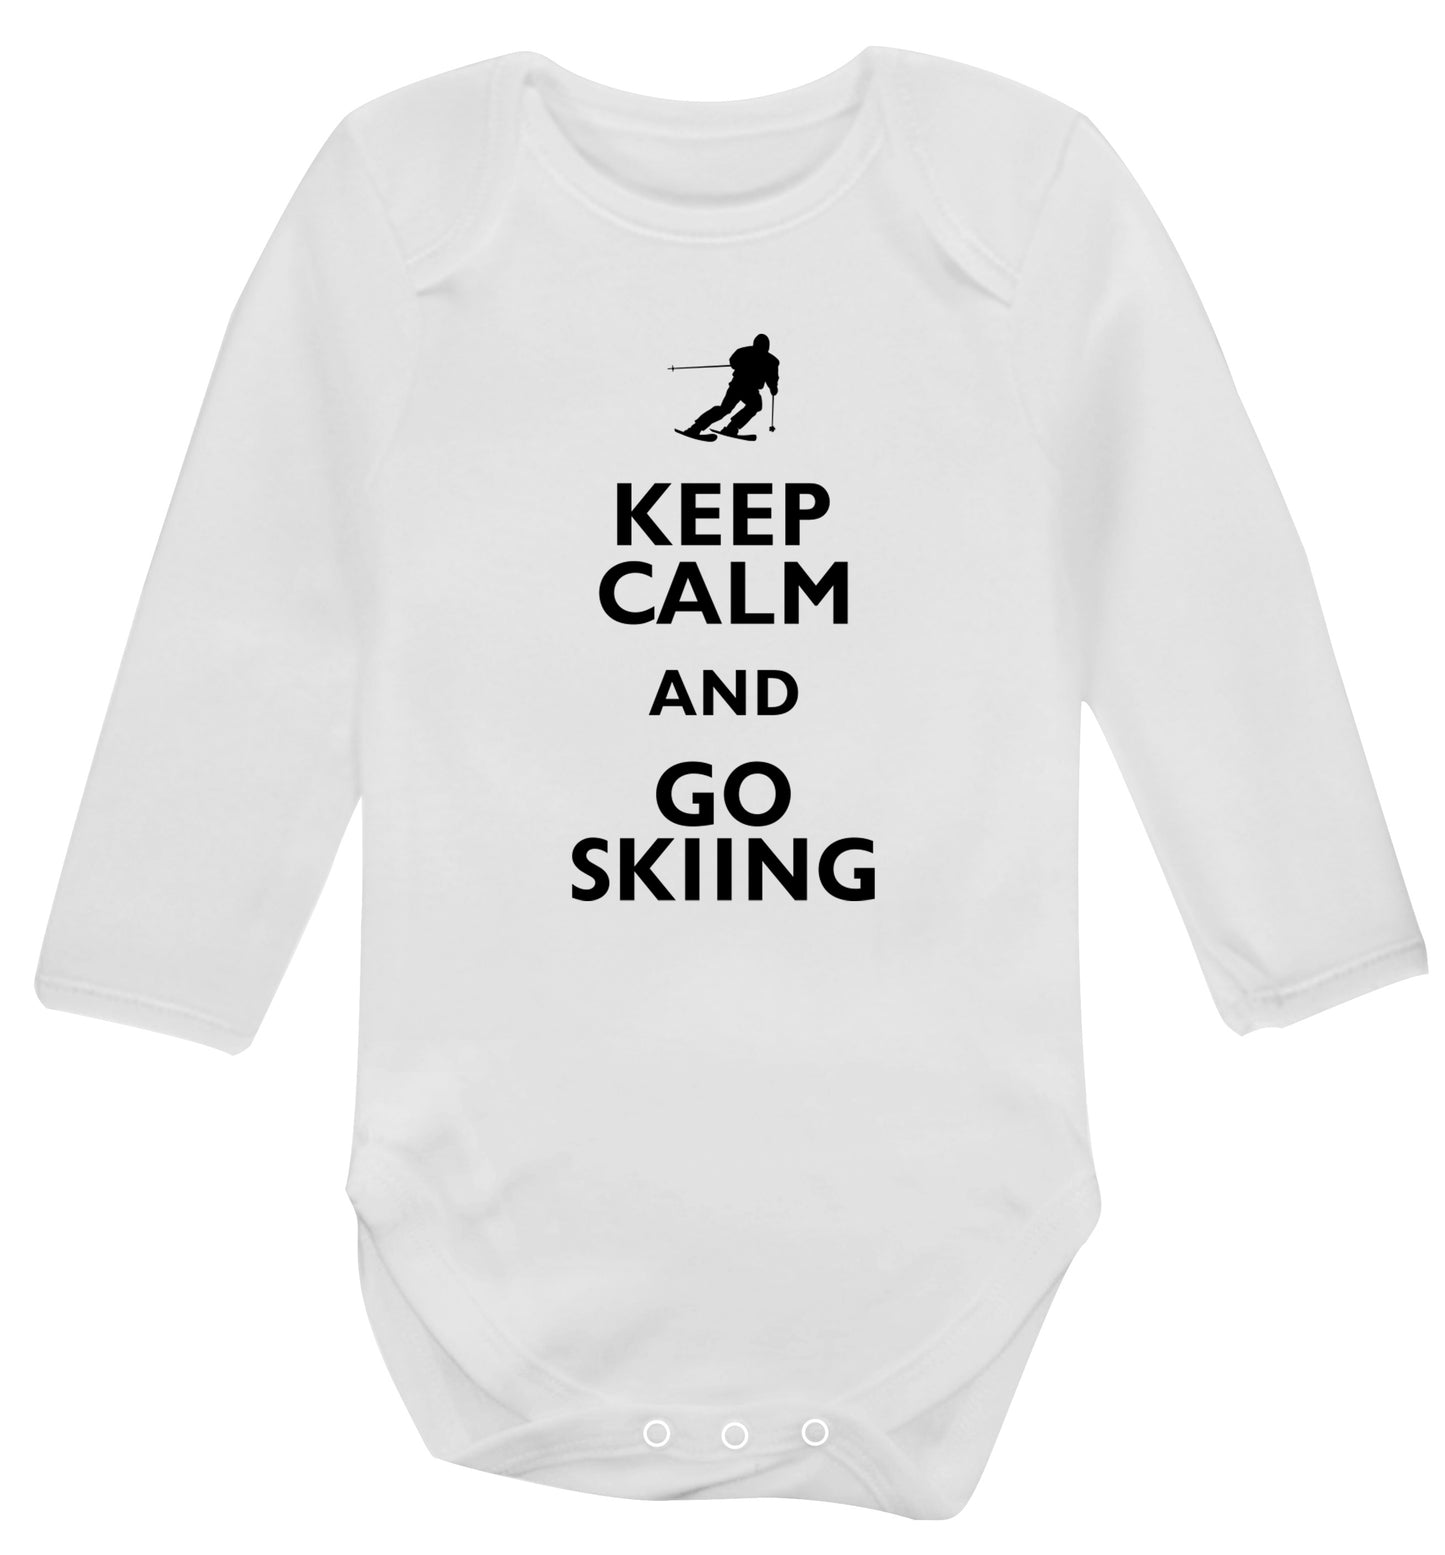 Keep calm and go skiing Baby Vest long sleeved white 6-12 months